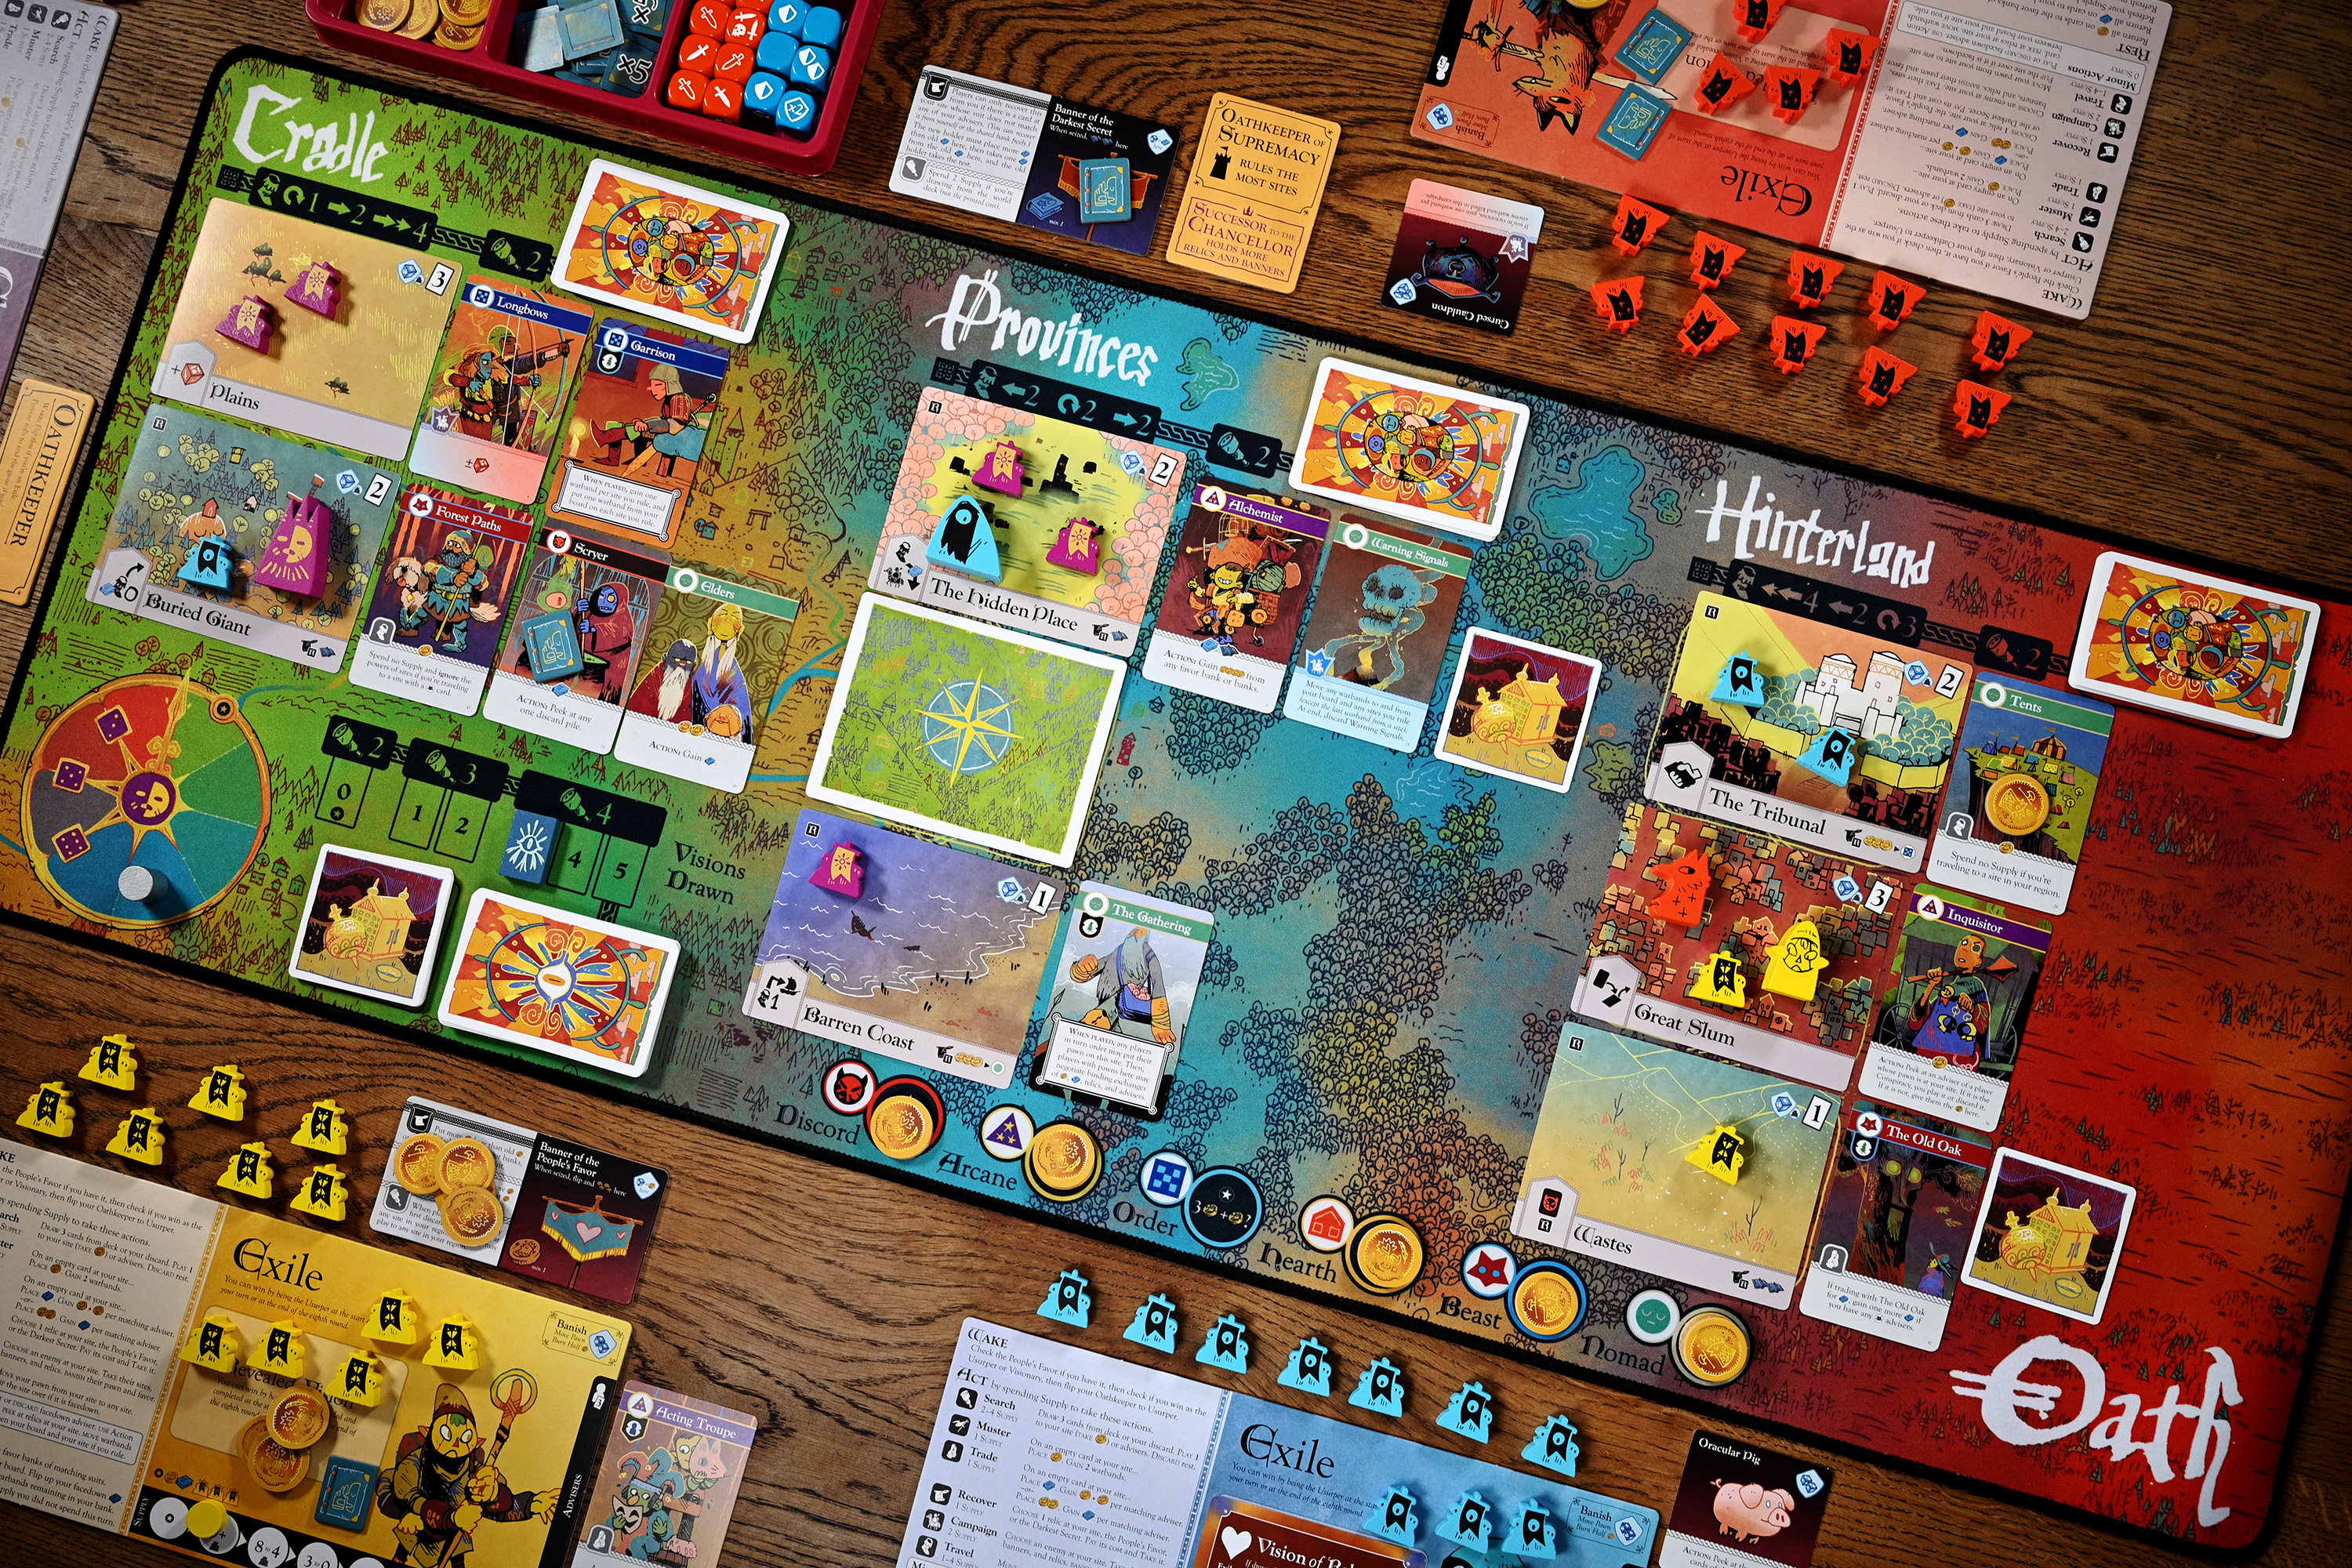 The base game of Oath laid out to play for six. The central game board is made of cloth, like a mousepad.